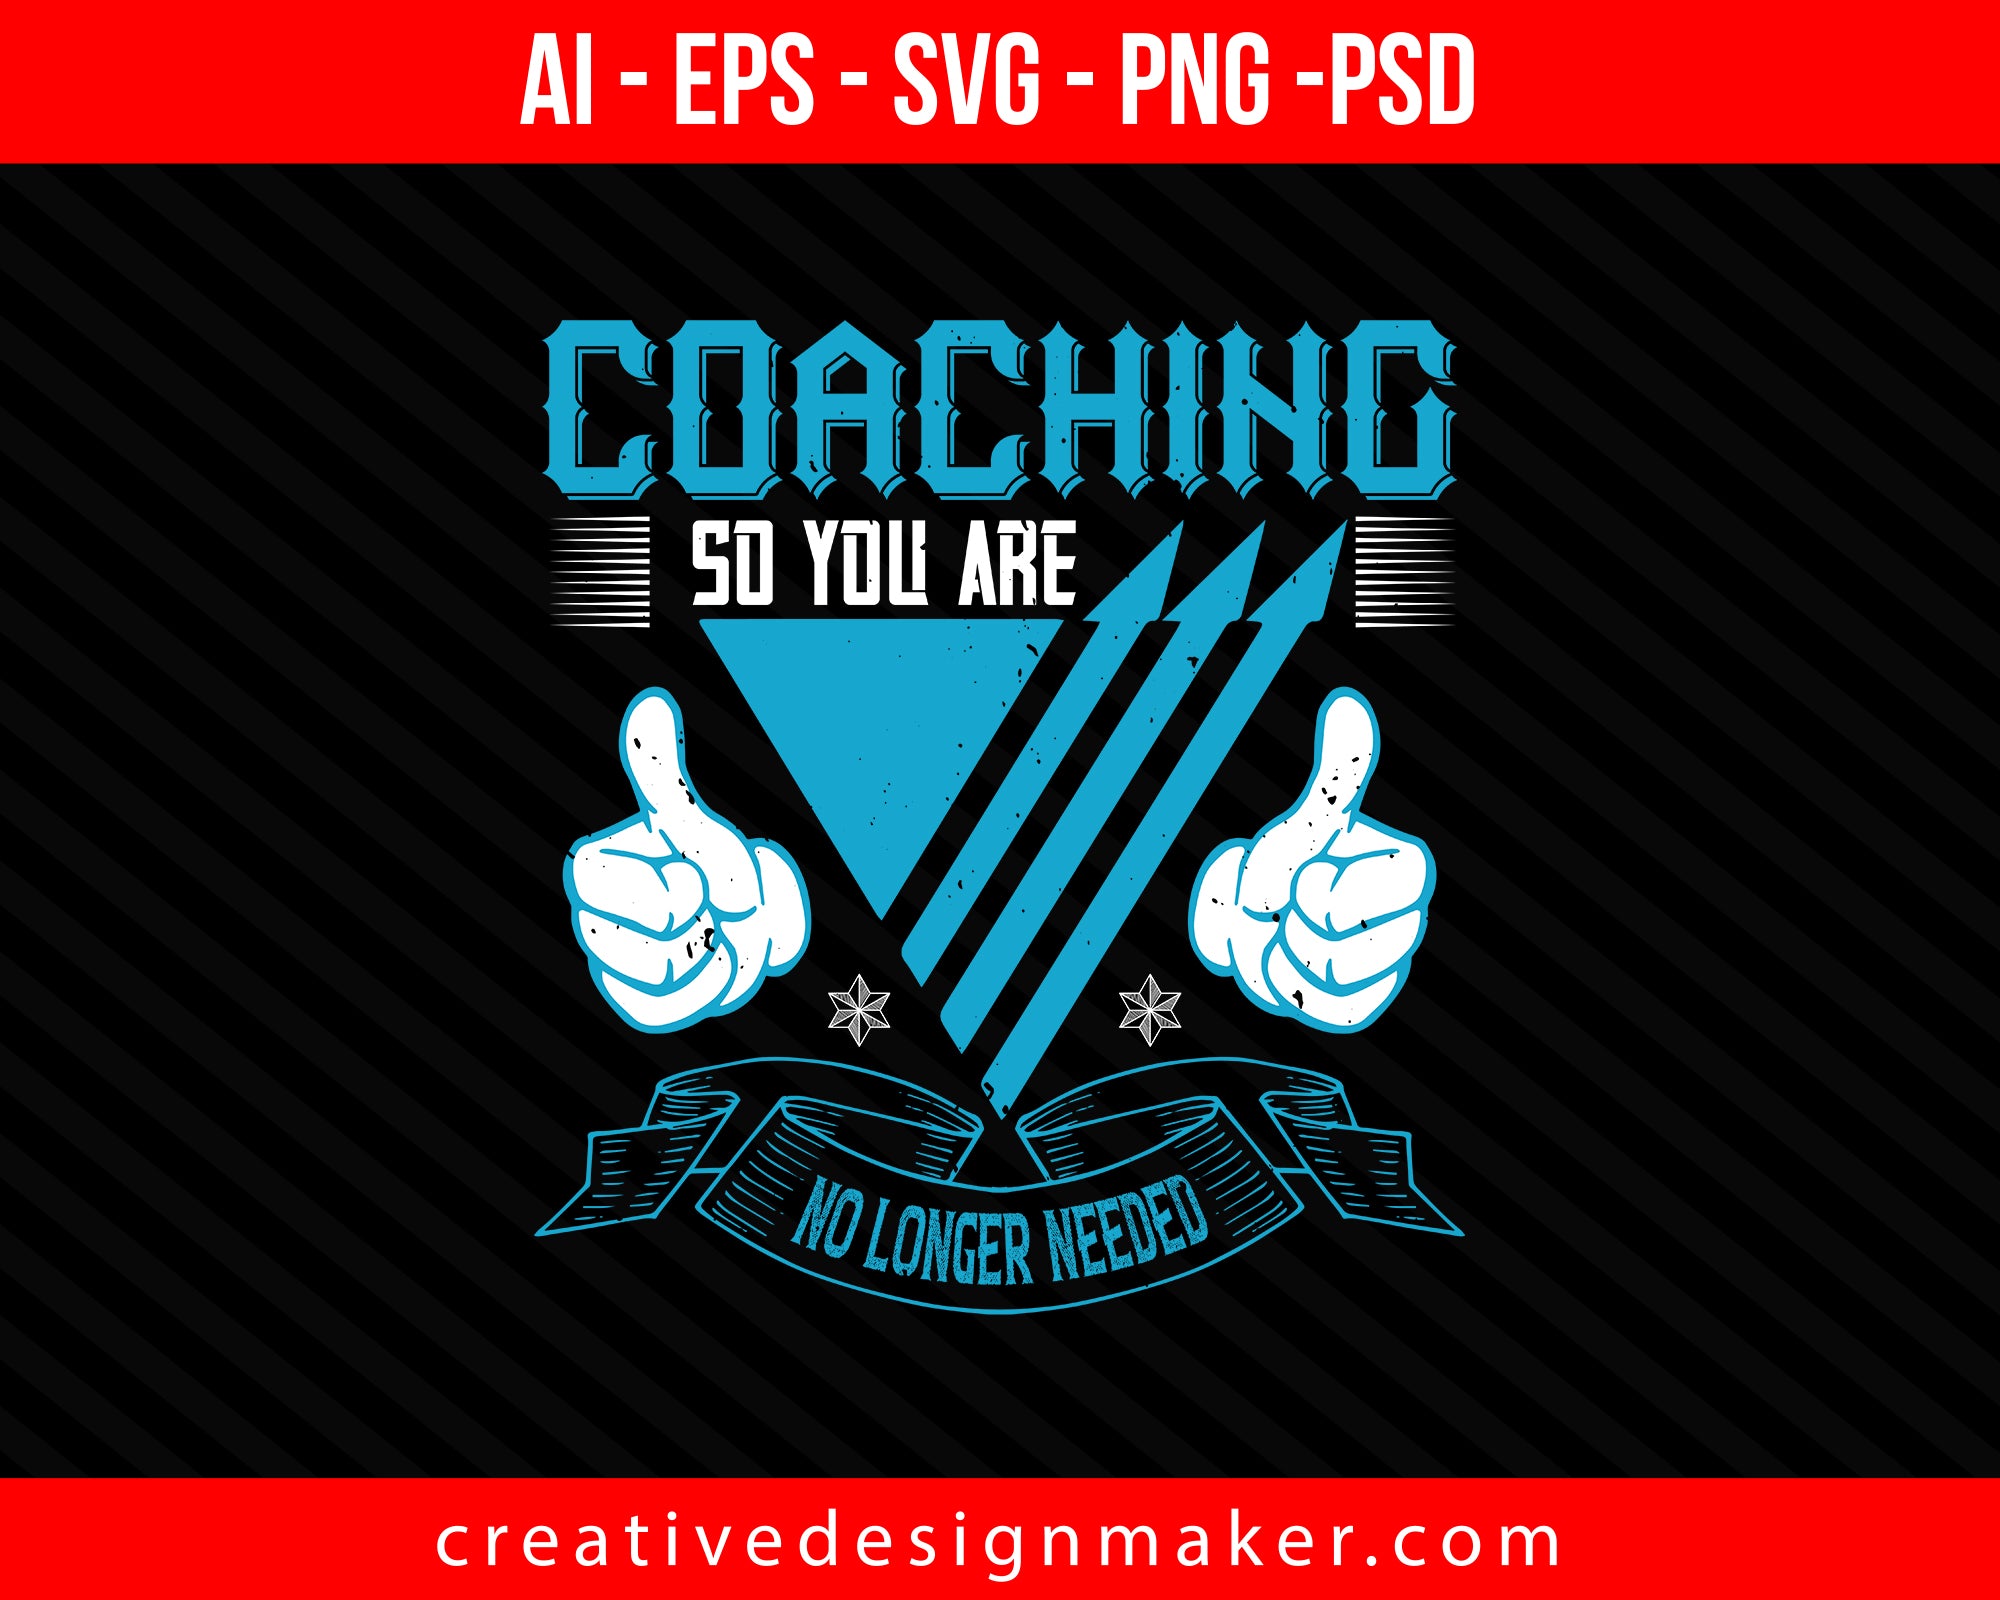 Coaching, so you are no longer needed Print Ready Editable T-Shirt SVG Design!